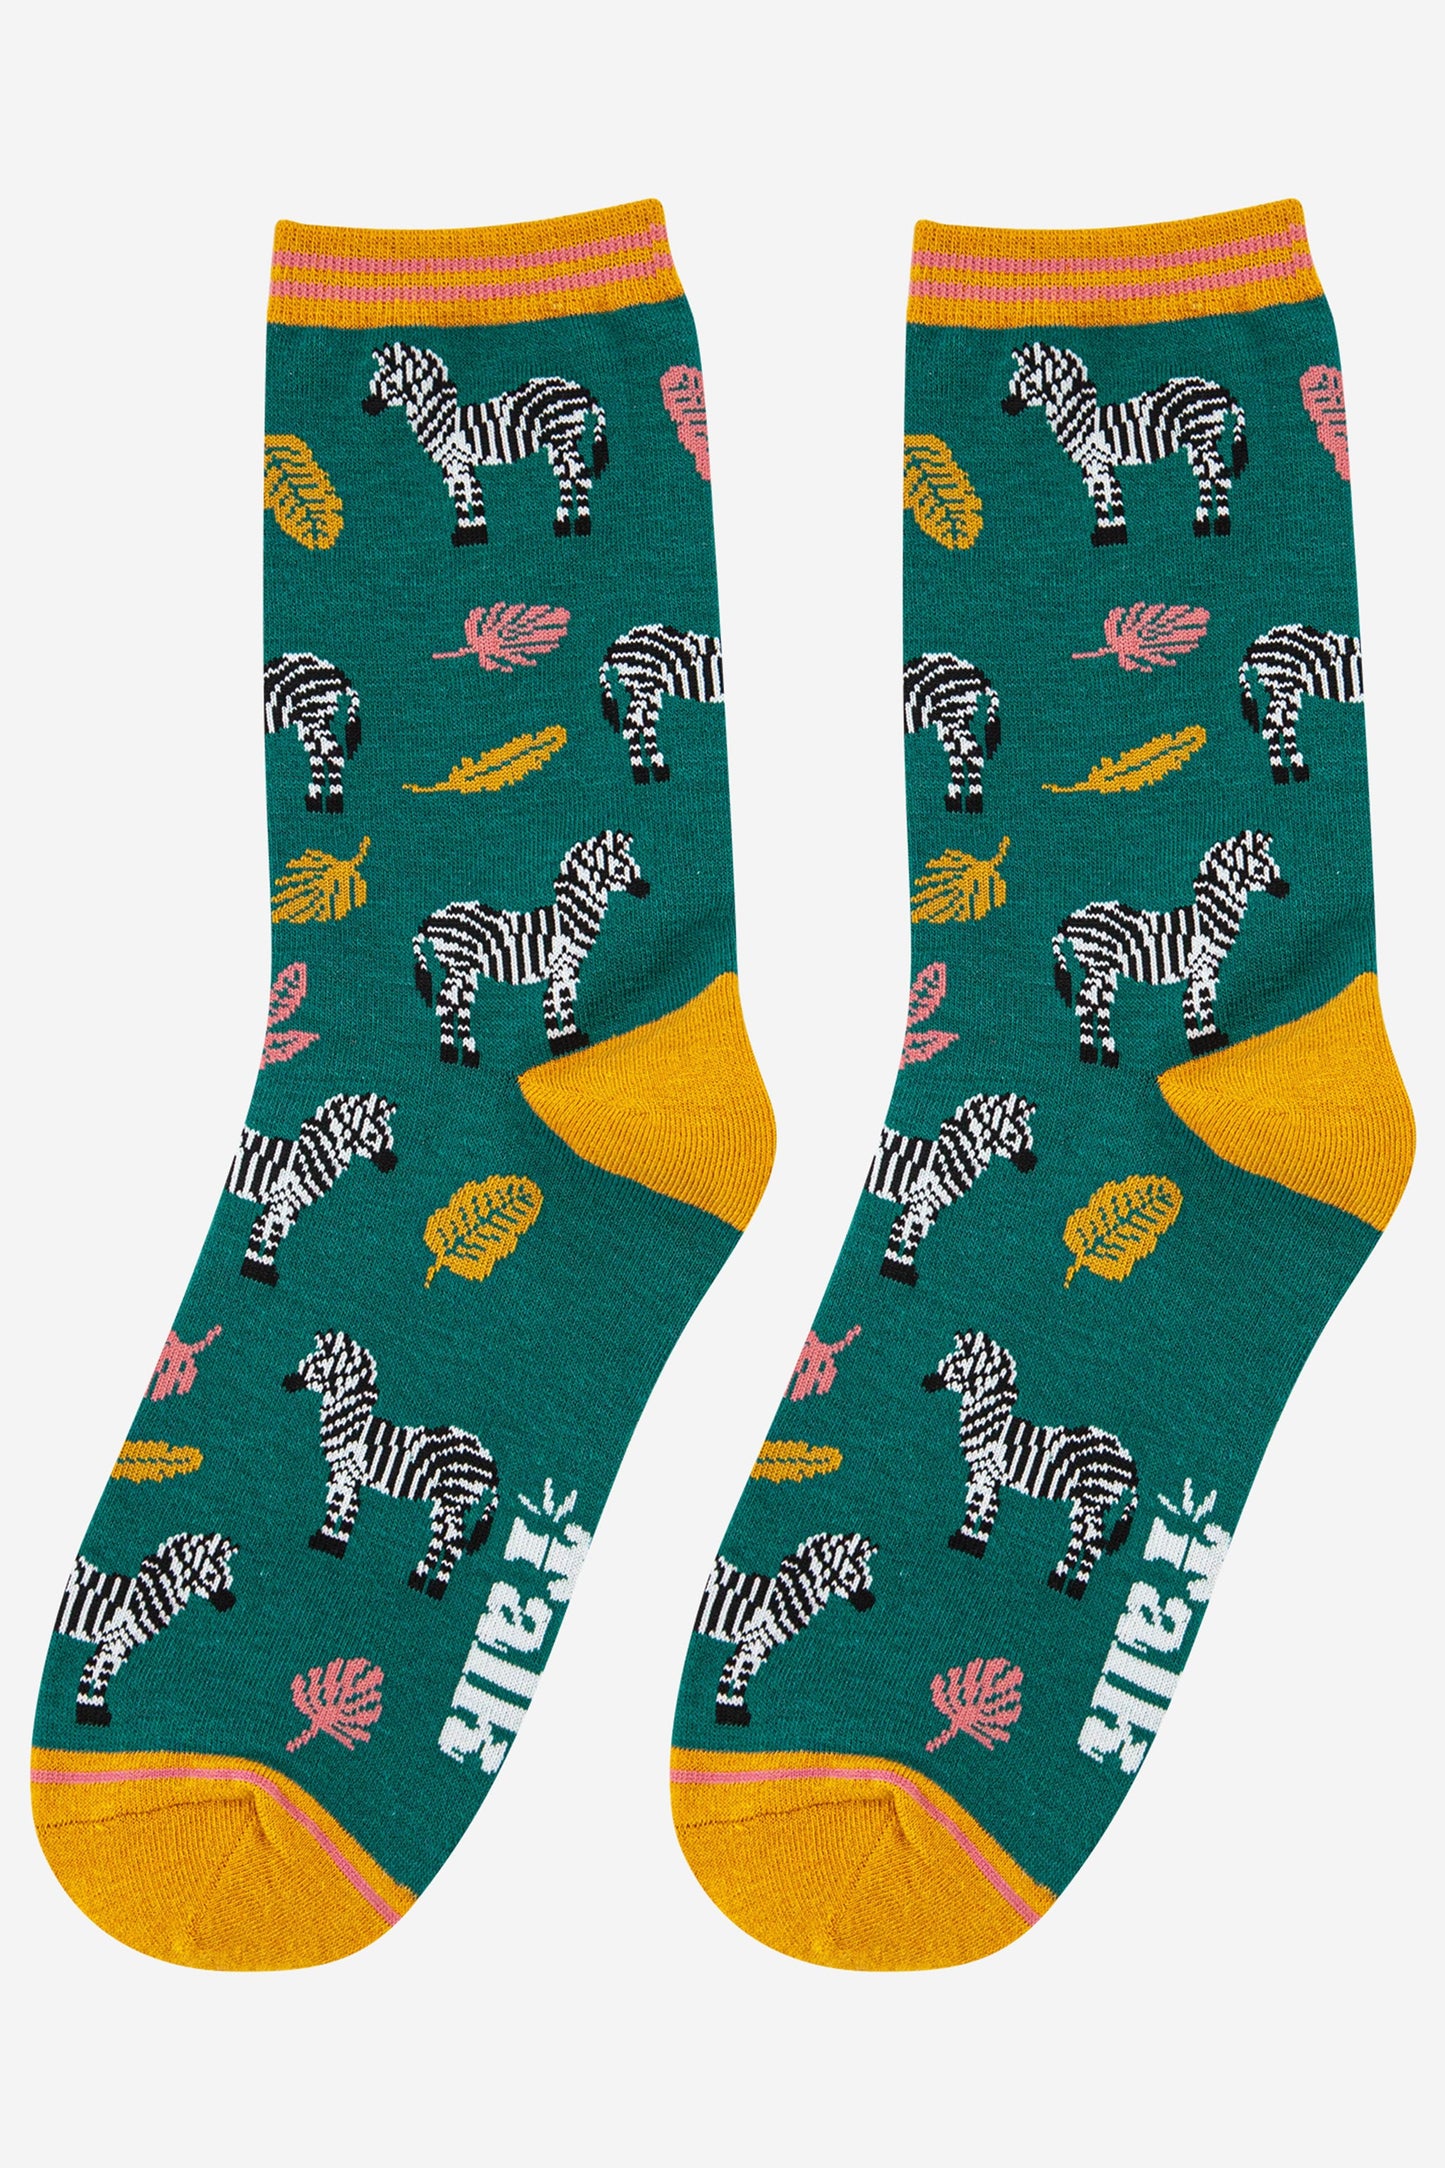 zebra and leaf pattern ladies ankle socks in green and yellow 